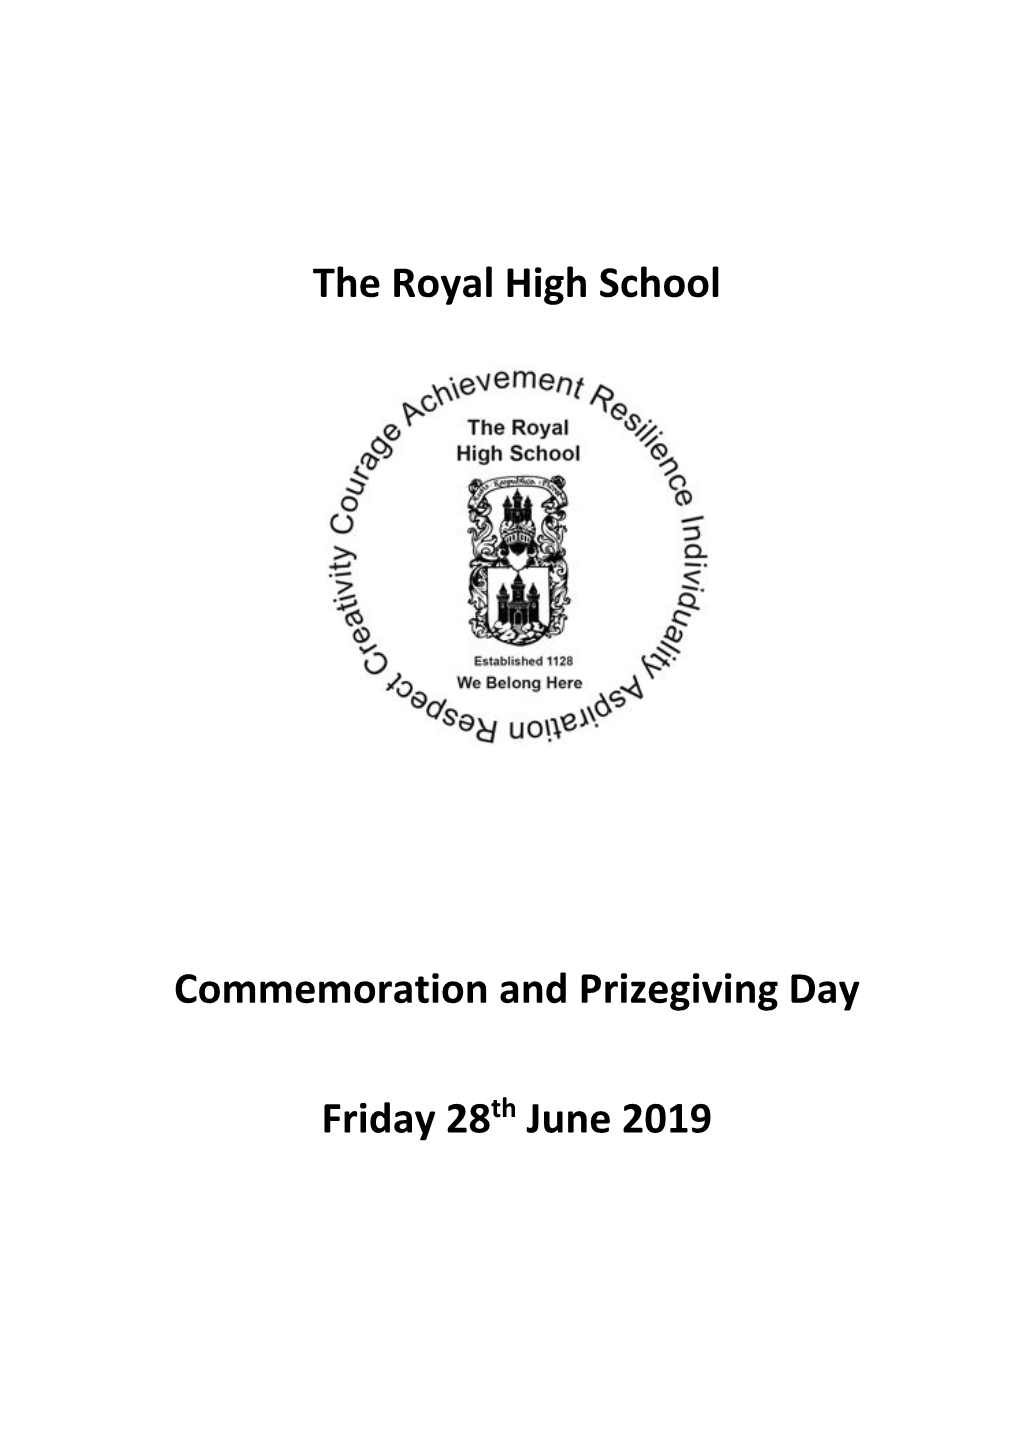 The Royal High School Commemoration and Prizegiving